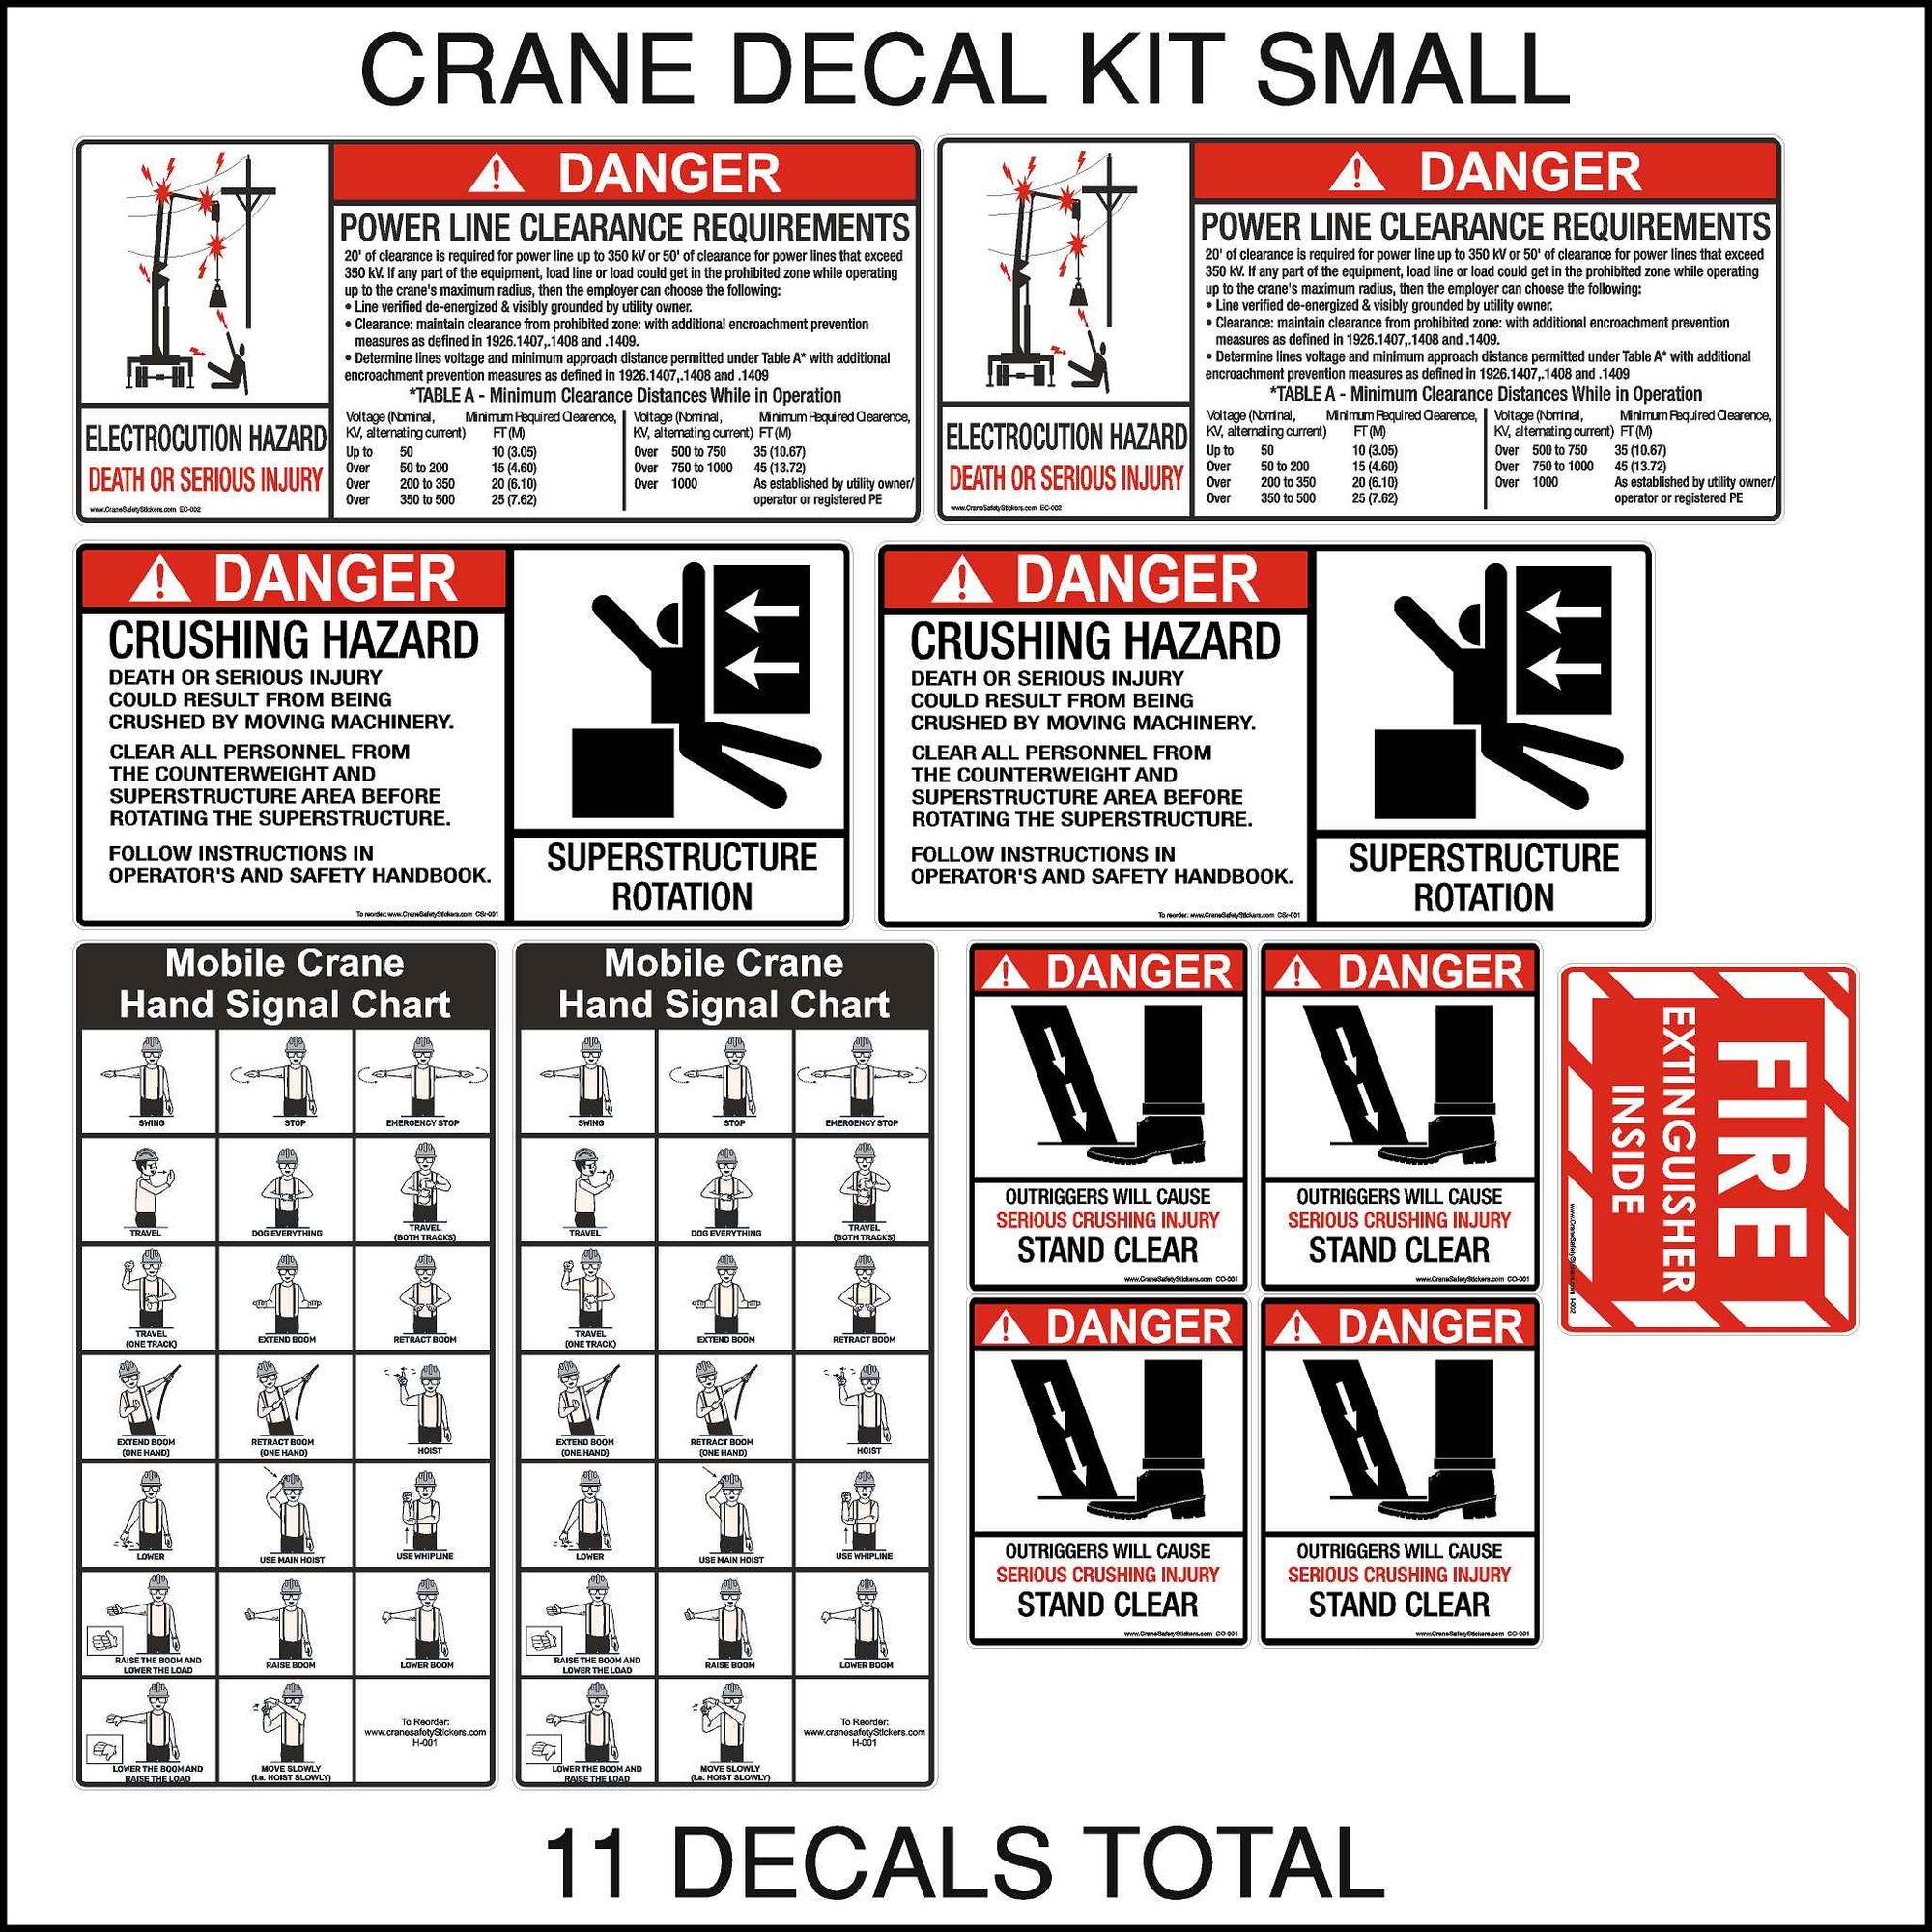 This small crane replacement sticker kit includes some of our most popular selling Crane Safety Decals. This kit contains 11 decals in total. This Small Crane and Boom Truck Safety Sticker Kit contains the stickers you need for most small cranes to pass certification including the following. Outrigger Crush, Mobile Crane Hand Signal Charts, Superstructure Rotation, Power Line Clearance Requirements, and Fire Extinguisher.